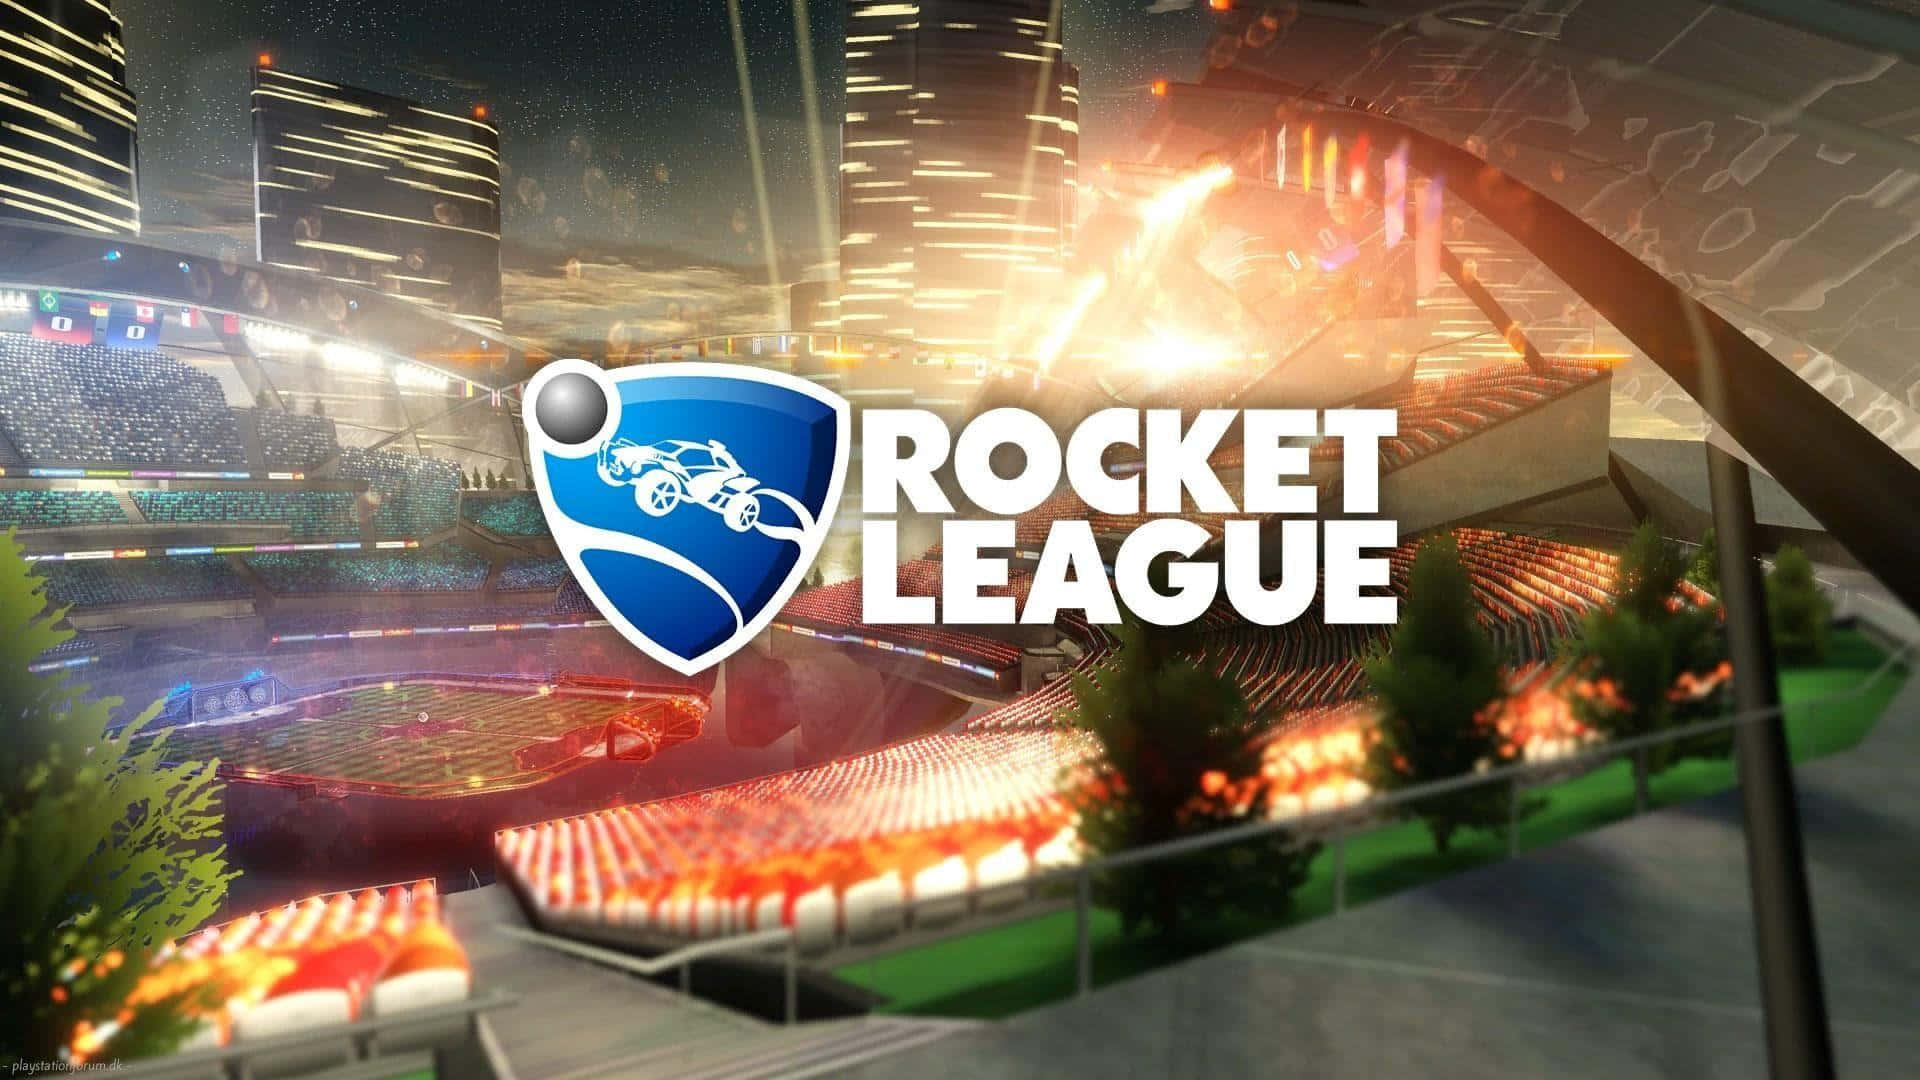 Go for a mesmerizing drive with Rocket League